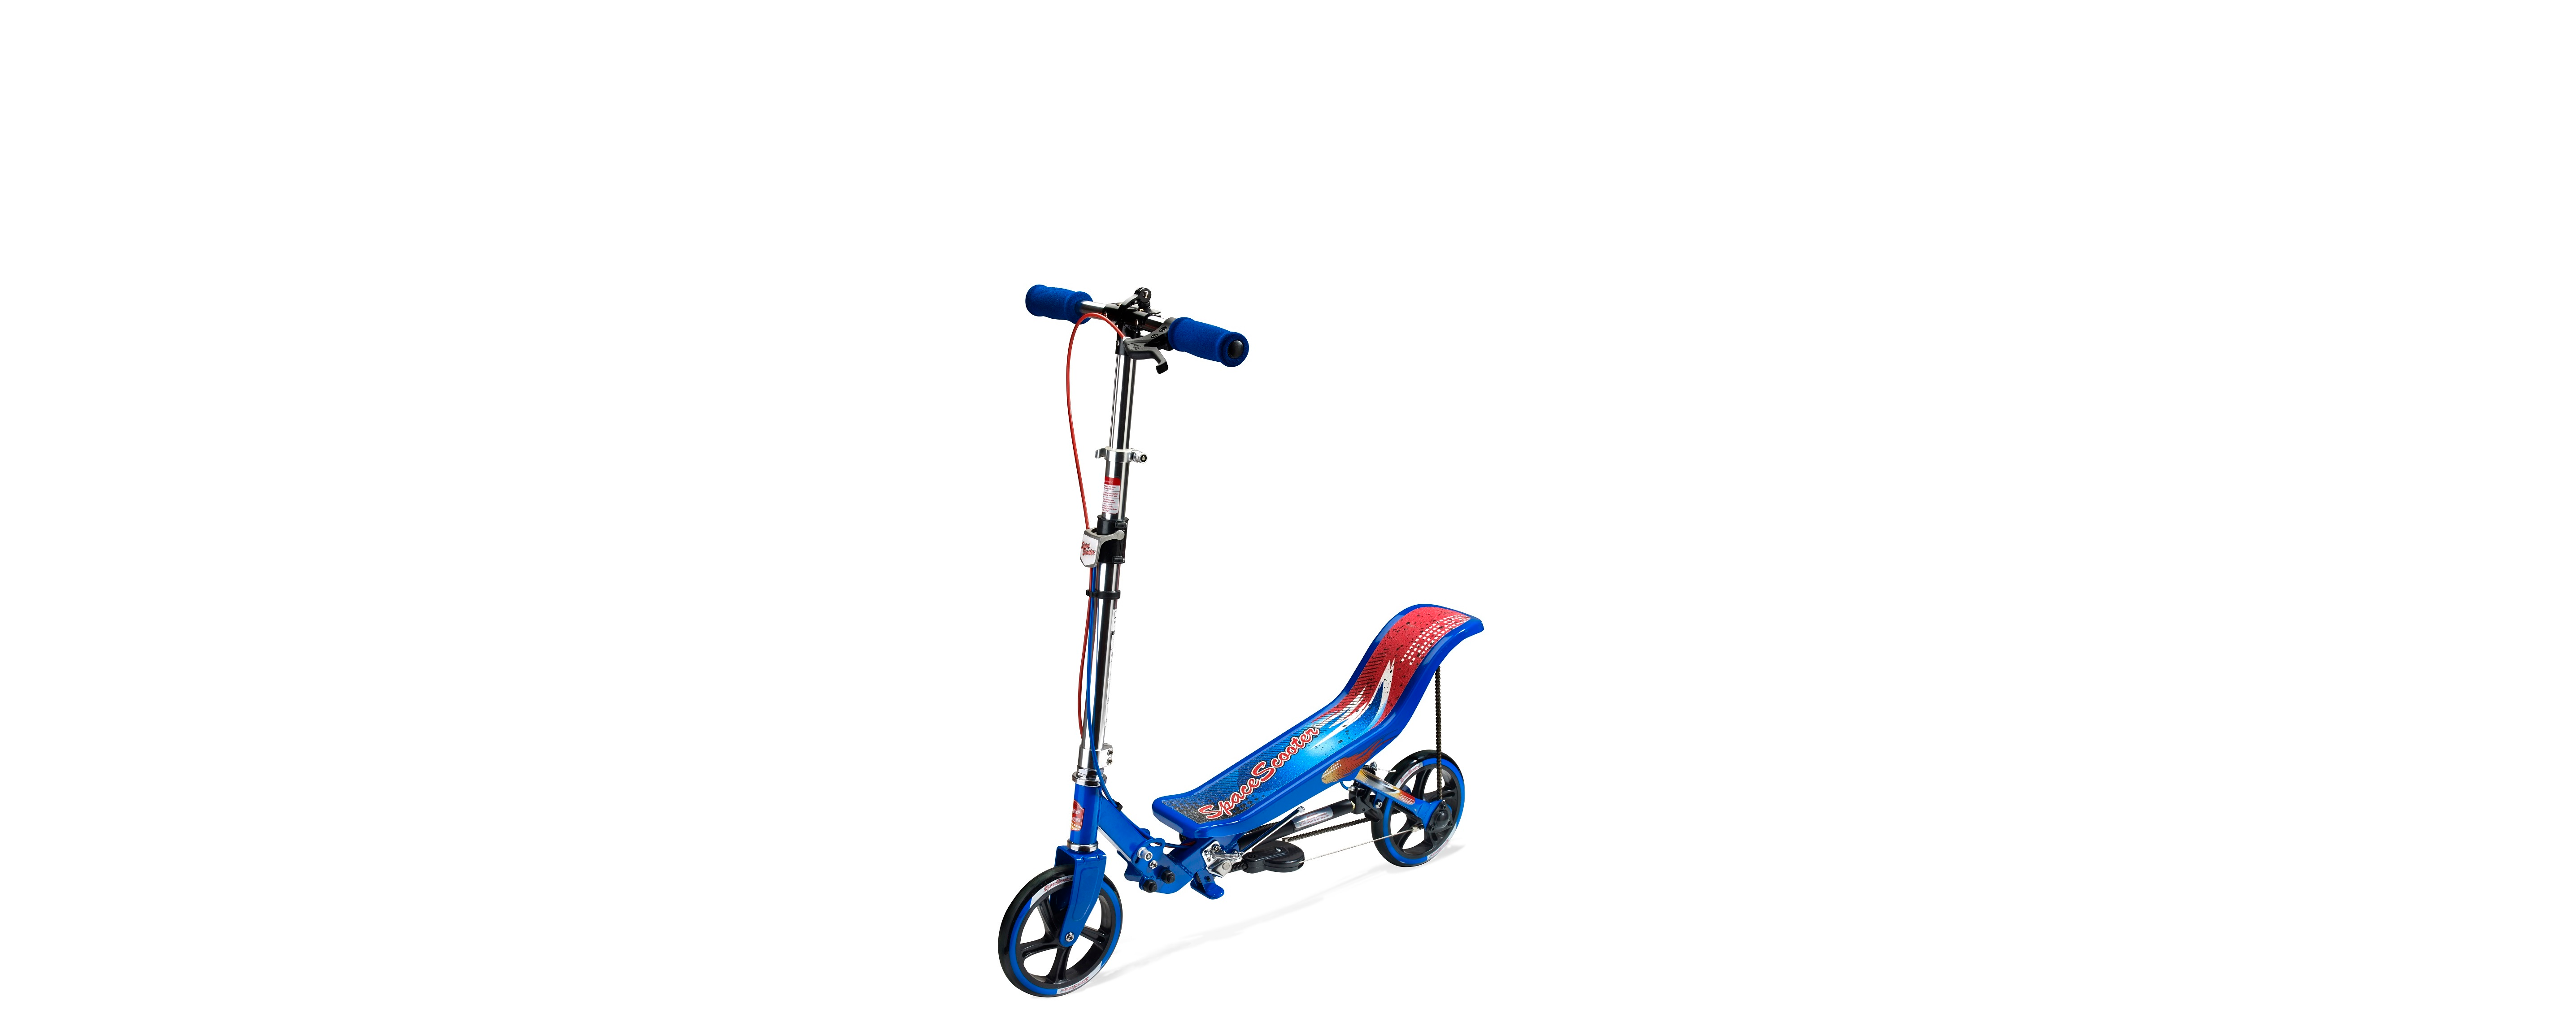 Space Scooter X560 & X580 series